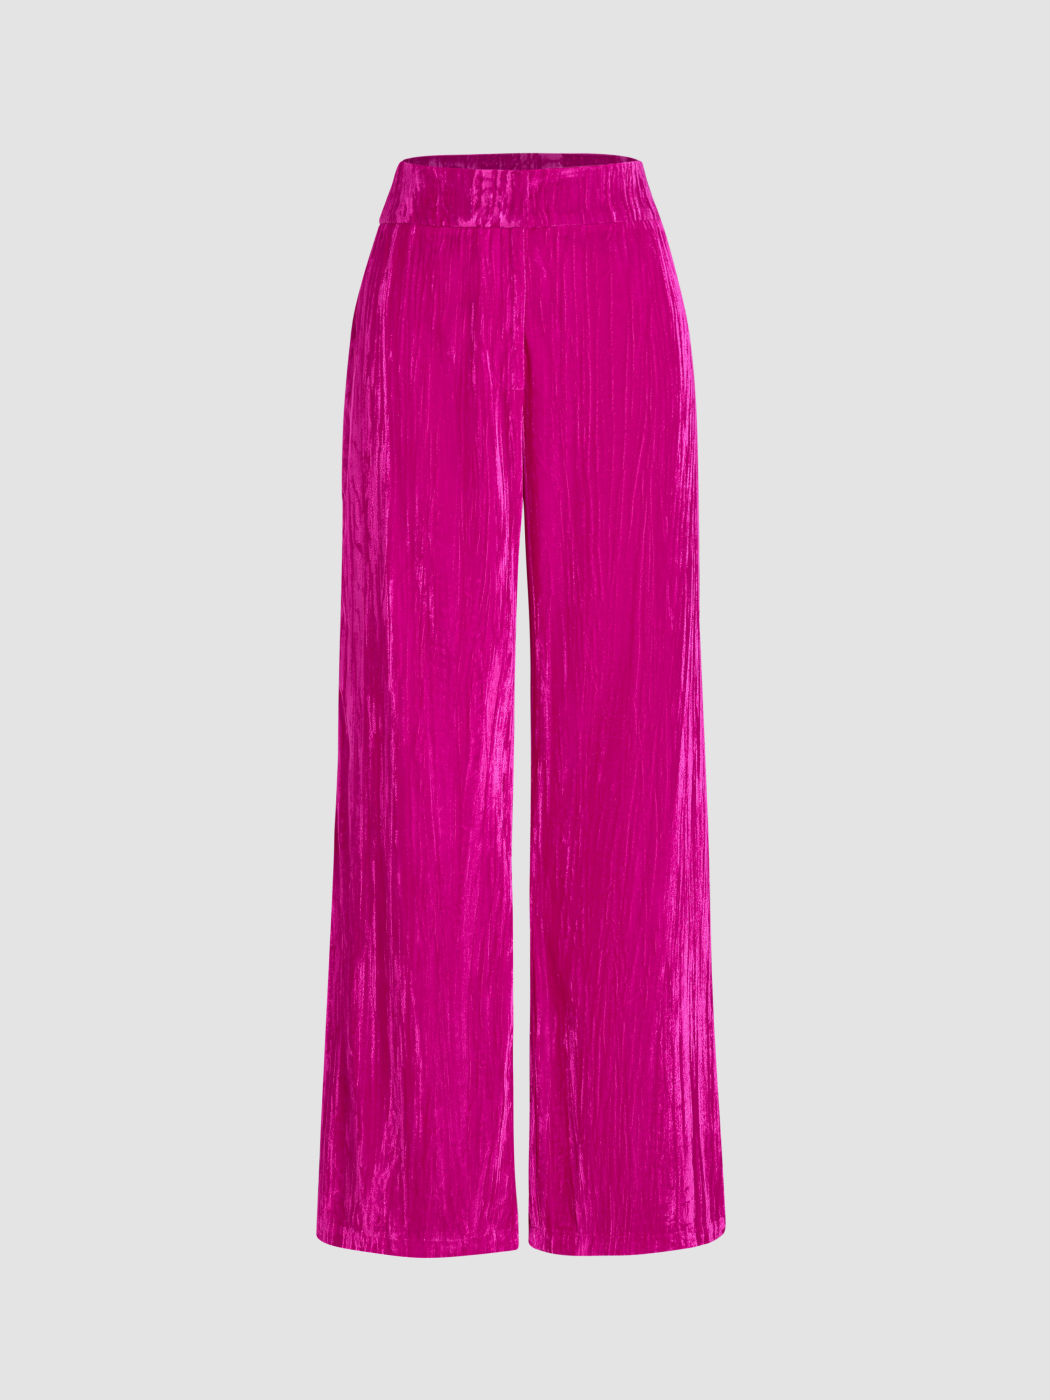 Velvet Solid Buckle Up Flared Trousers For Vacation Holiday